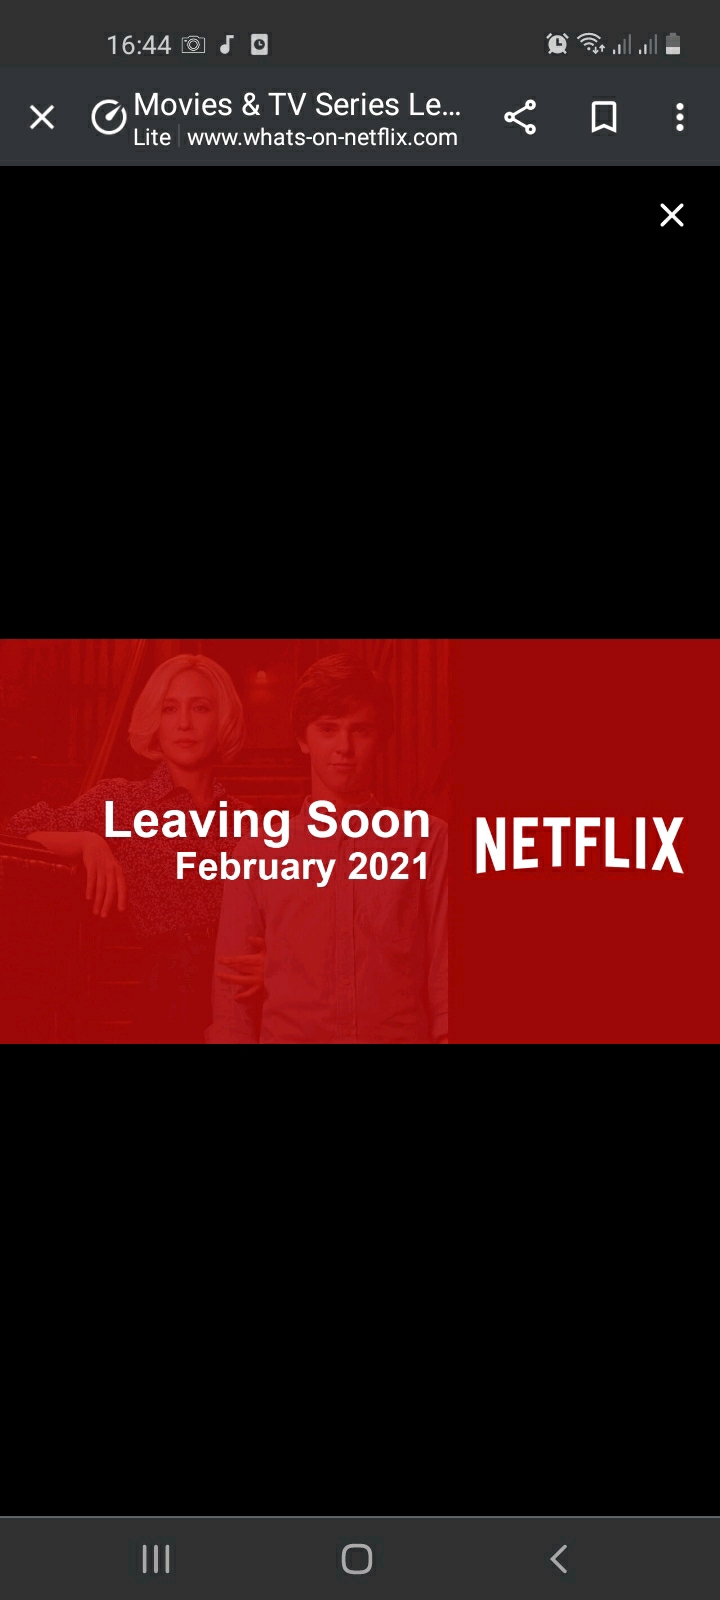 Movies & TV Series Leaving Netflix in February 2021 – What’s on Netflix